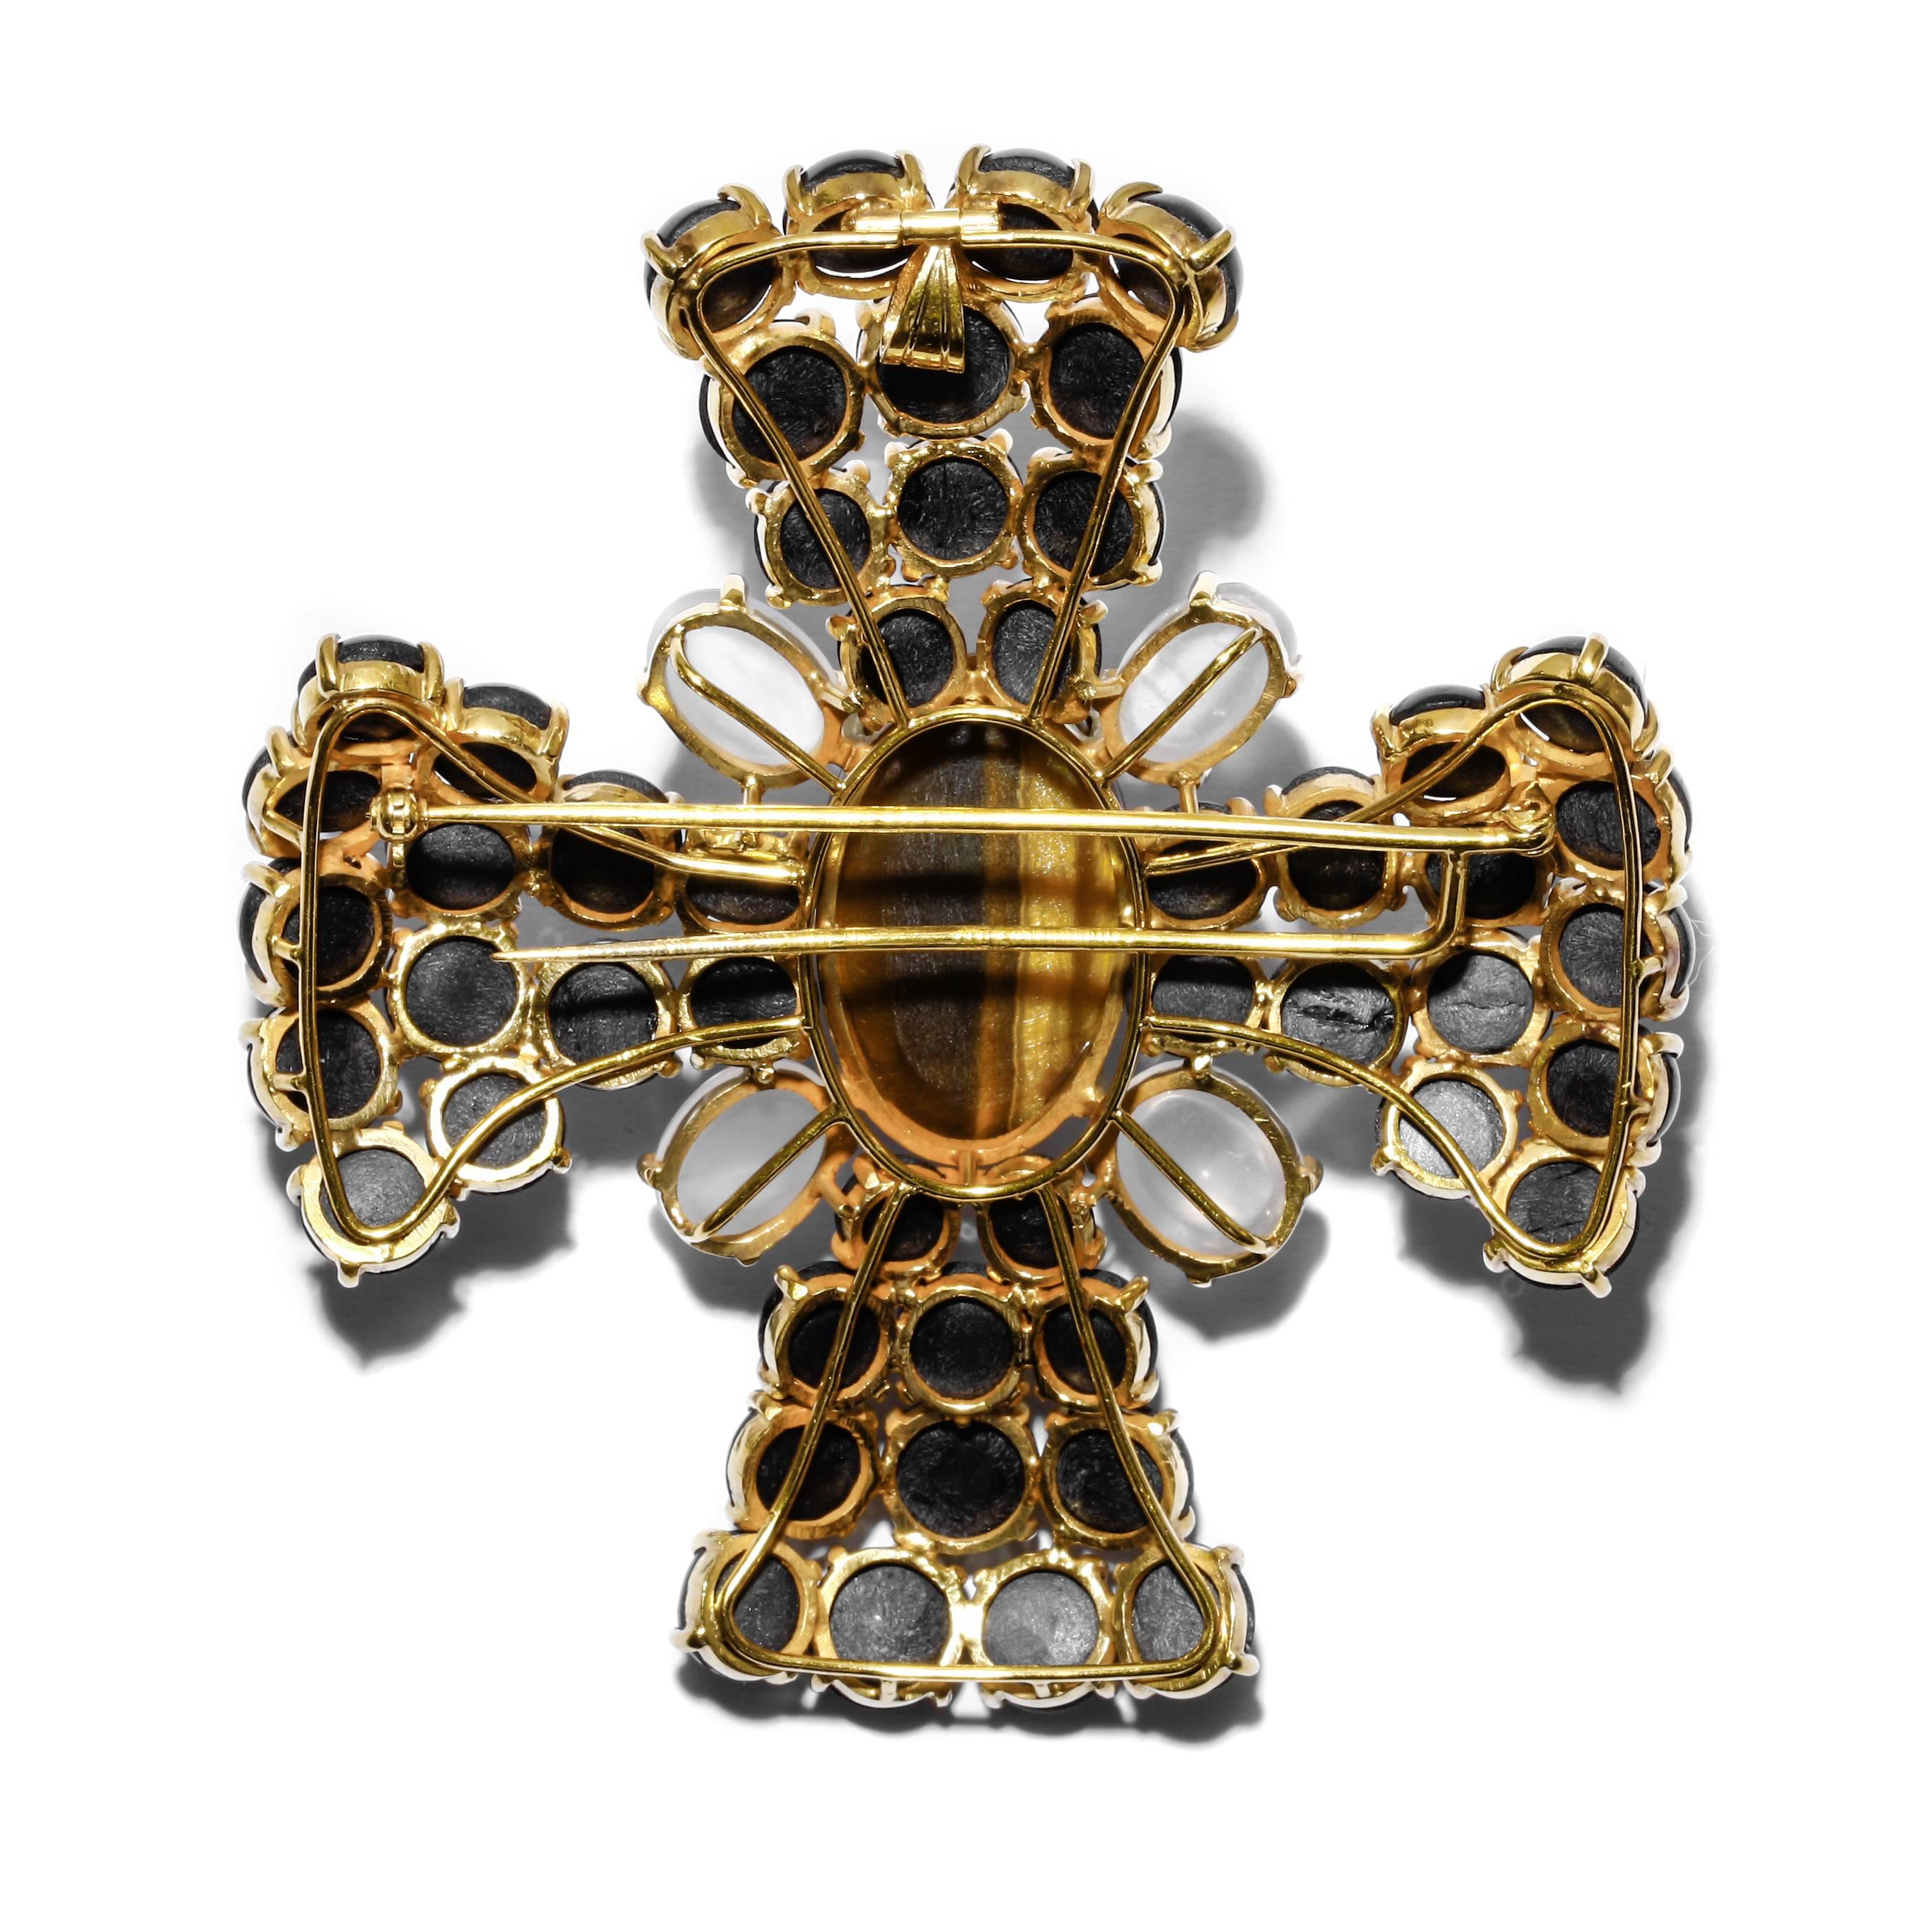 This vintage custom handmade Maltese cross convertible brooch and pendant contains a mix of natural cabochon-cut gemstones that all display optical gemological phenomena. The setting is made of 18k yellow gold. The largest stone in the center is a